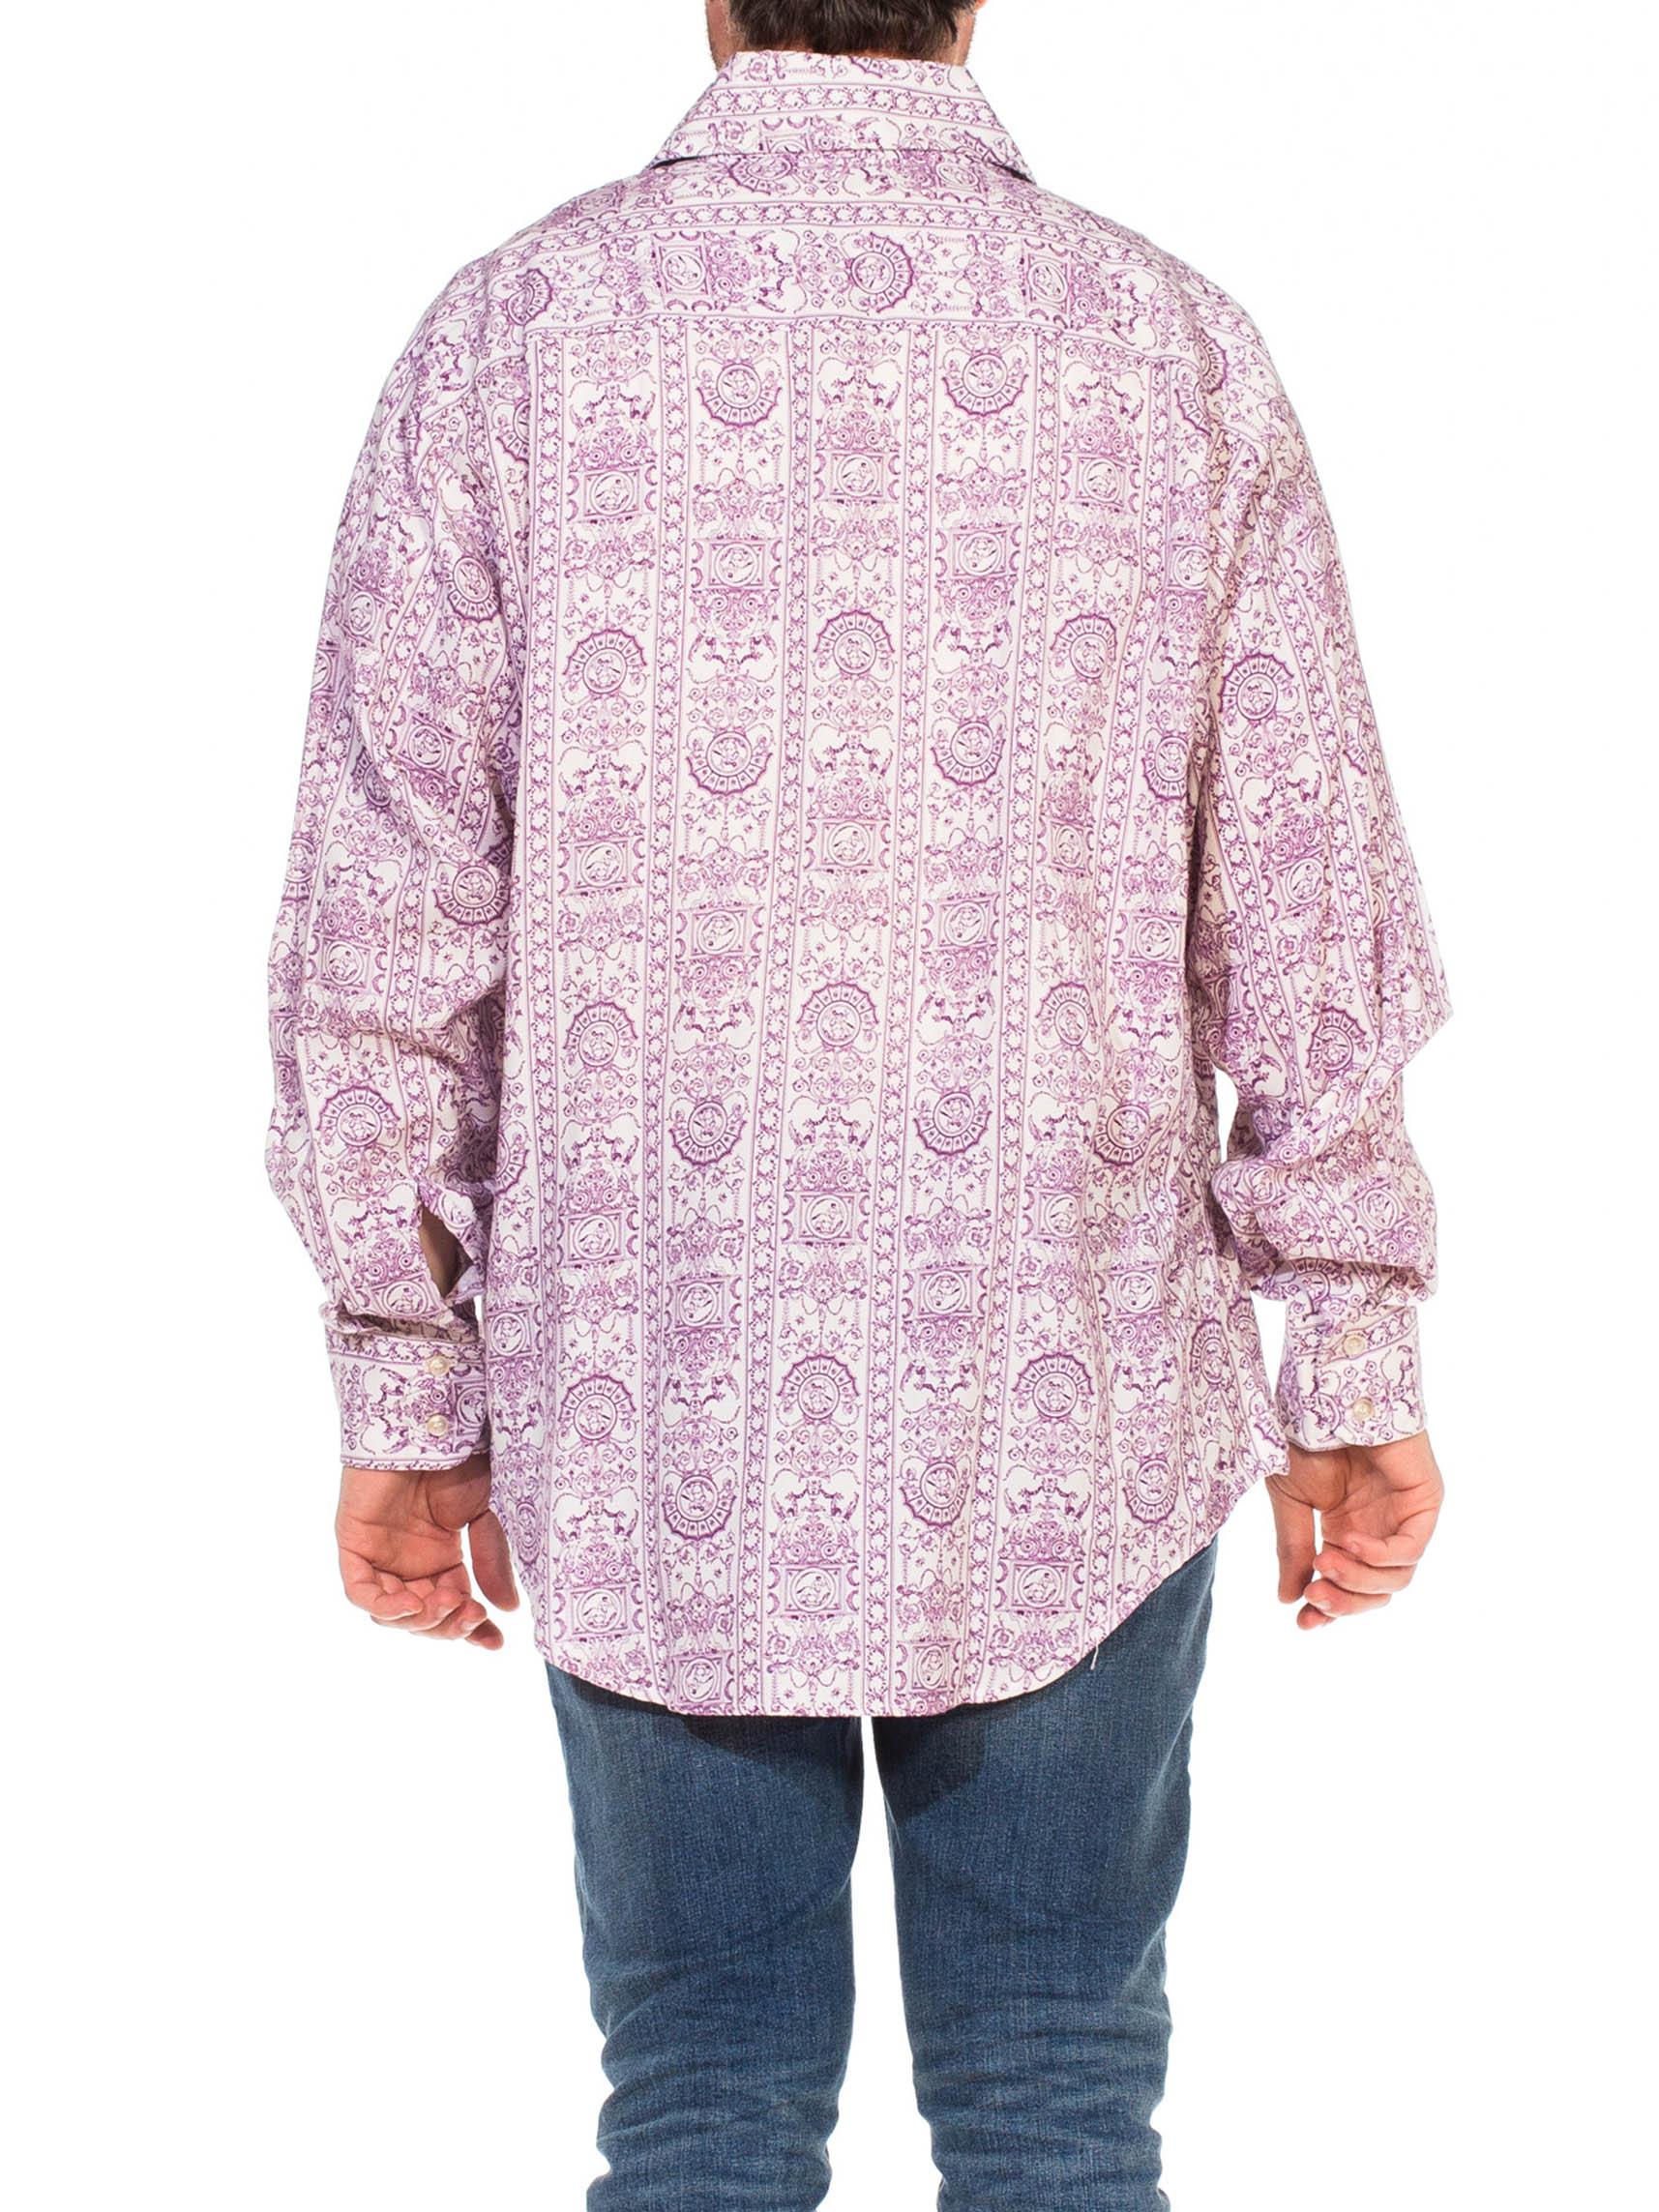 1970S BIG SIR White & Purple Cotton Blend Long Sleeve Medieval Griffin Print Me For Sale 3